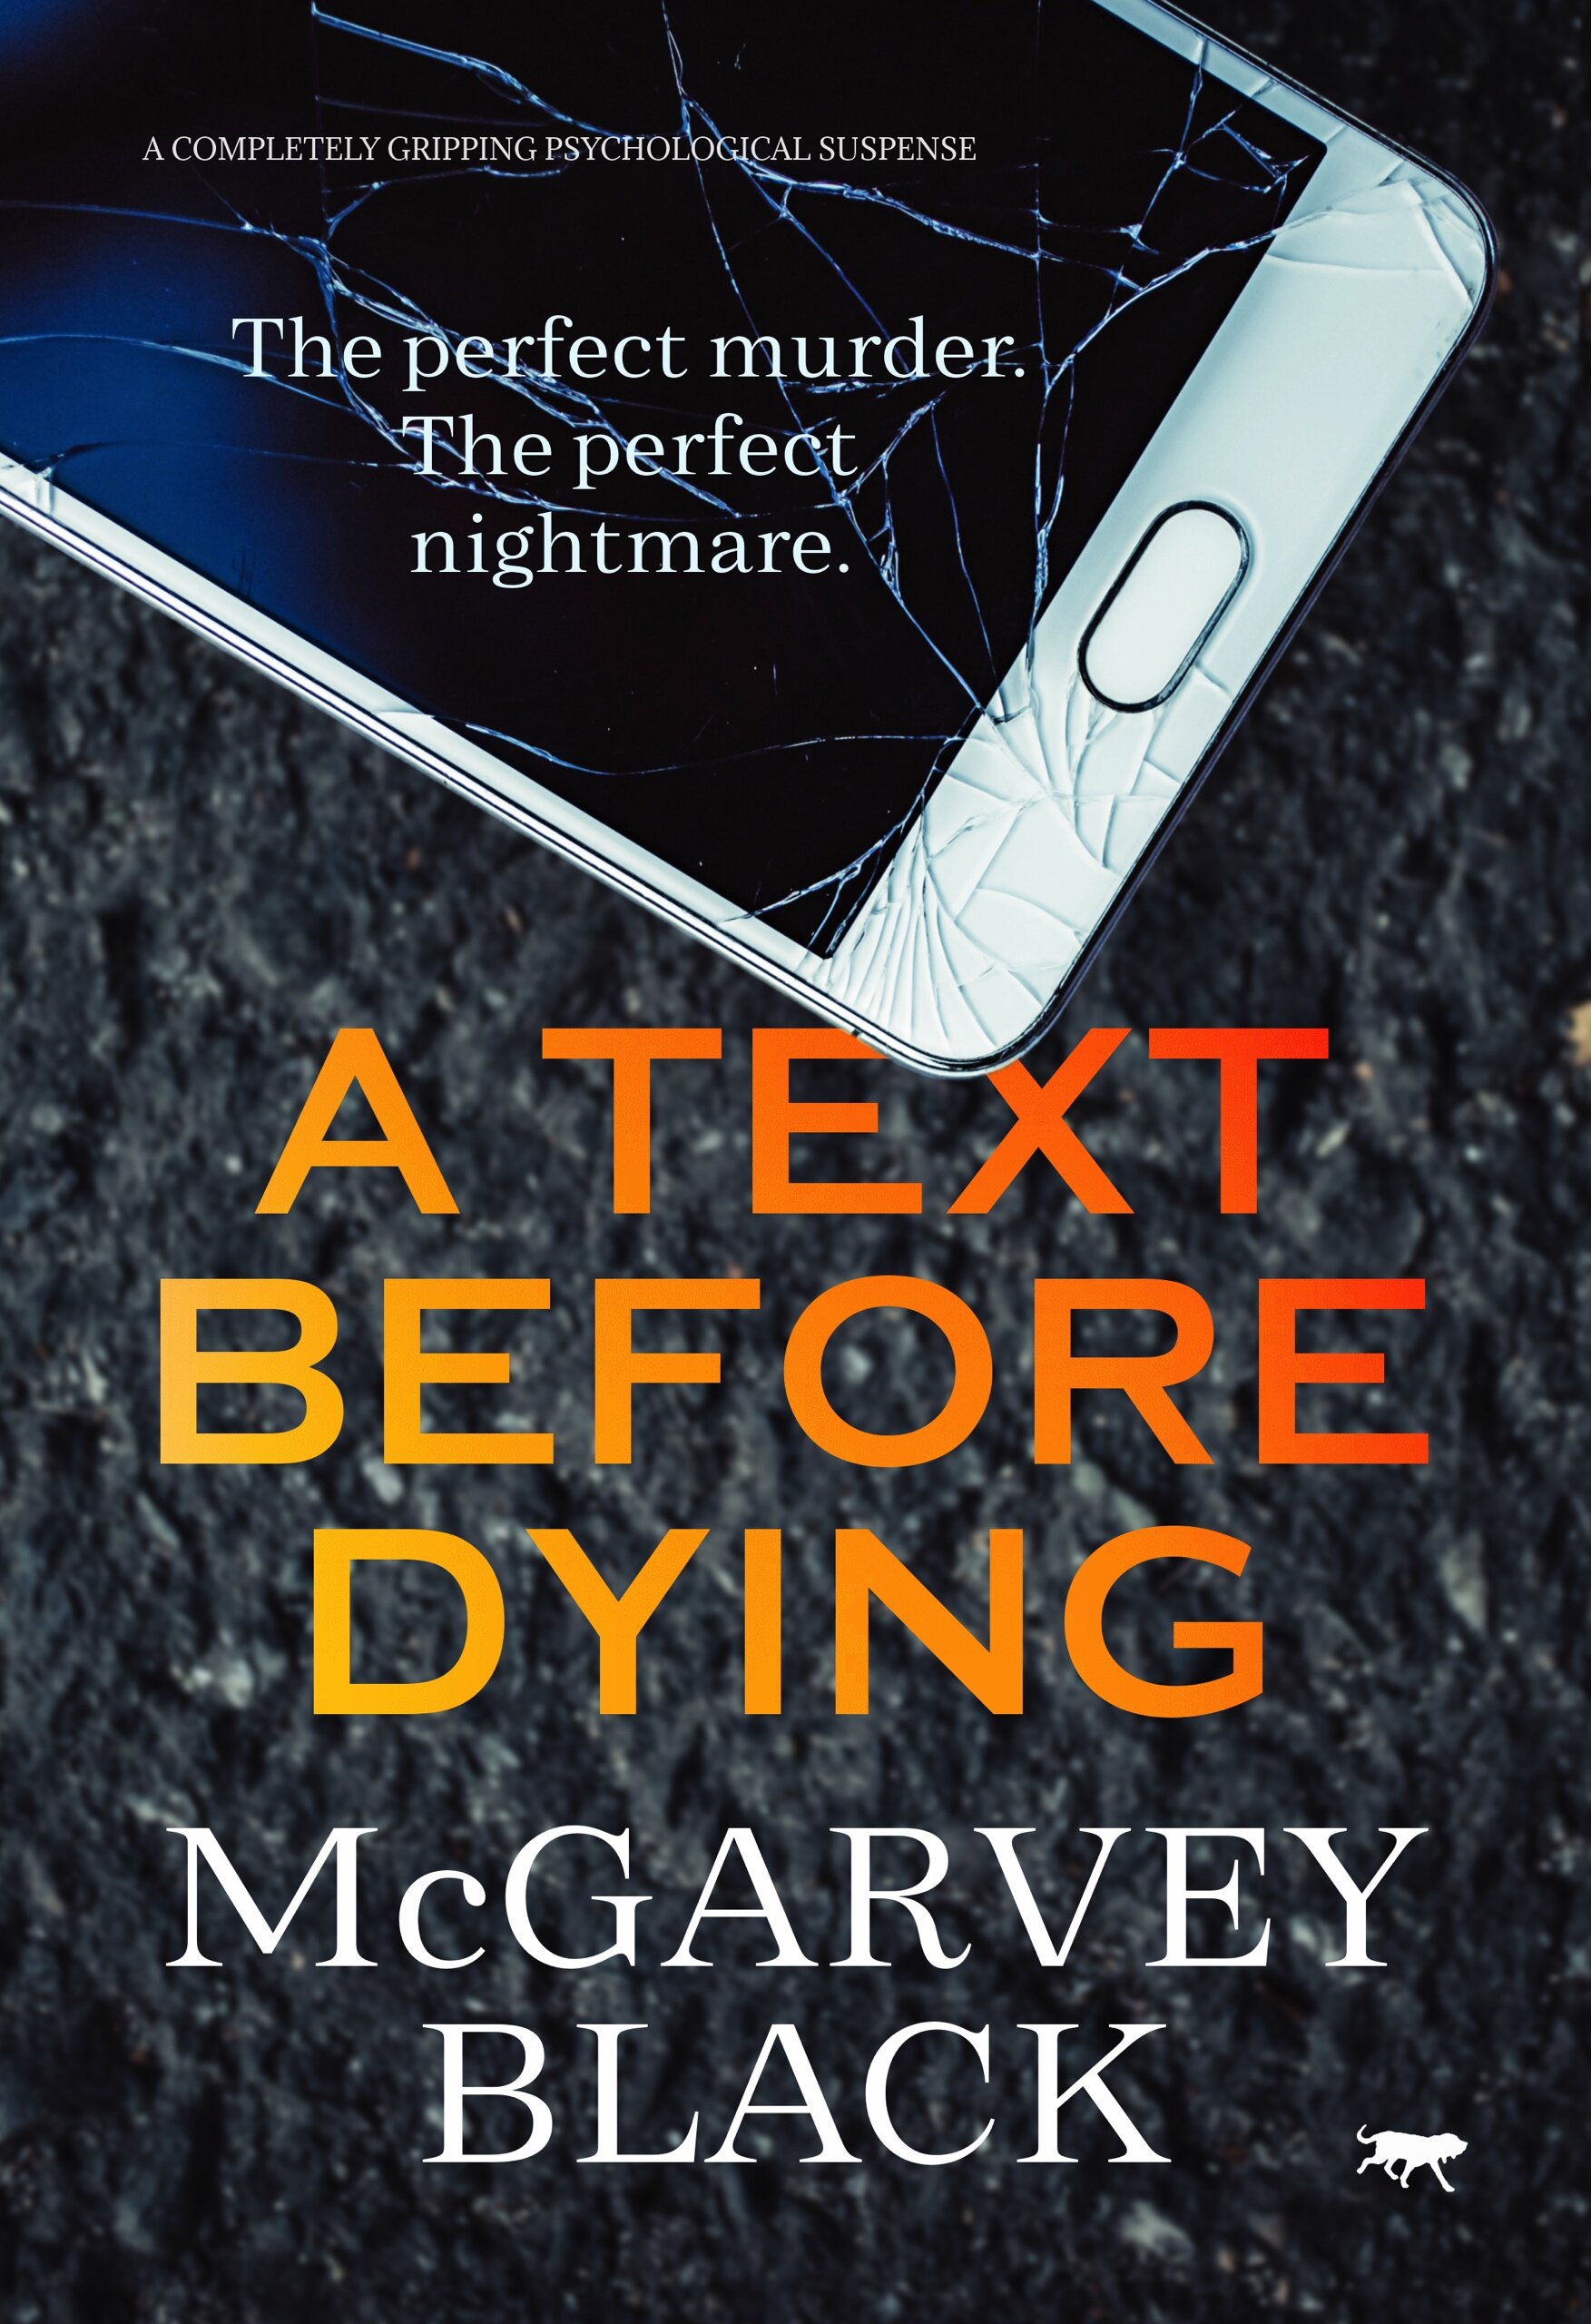 A-Text-Before-Dying-Kindle.jpg